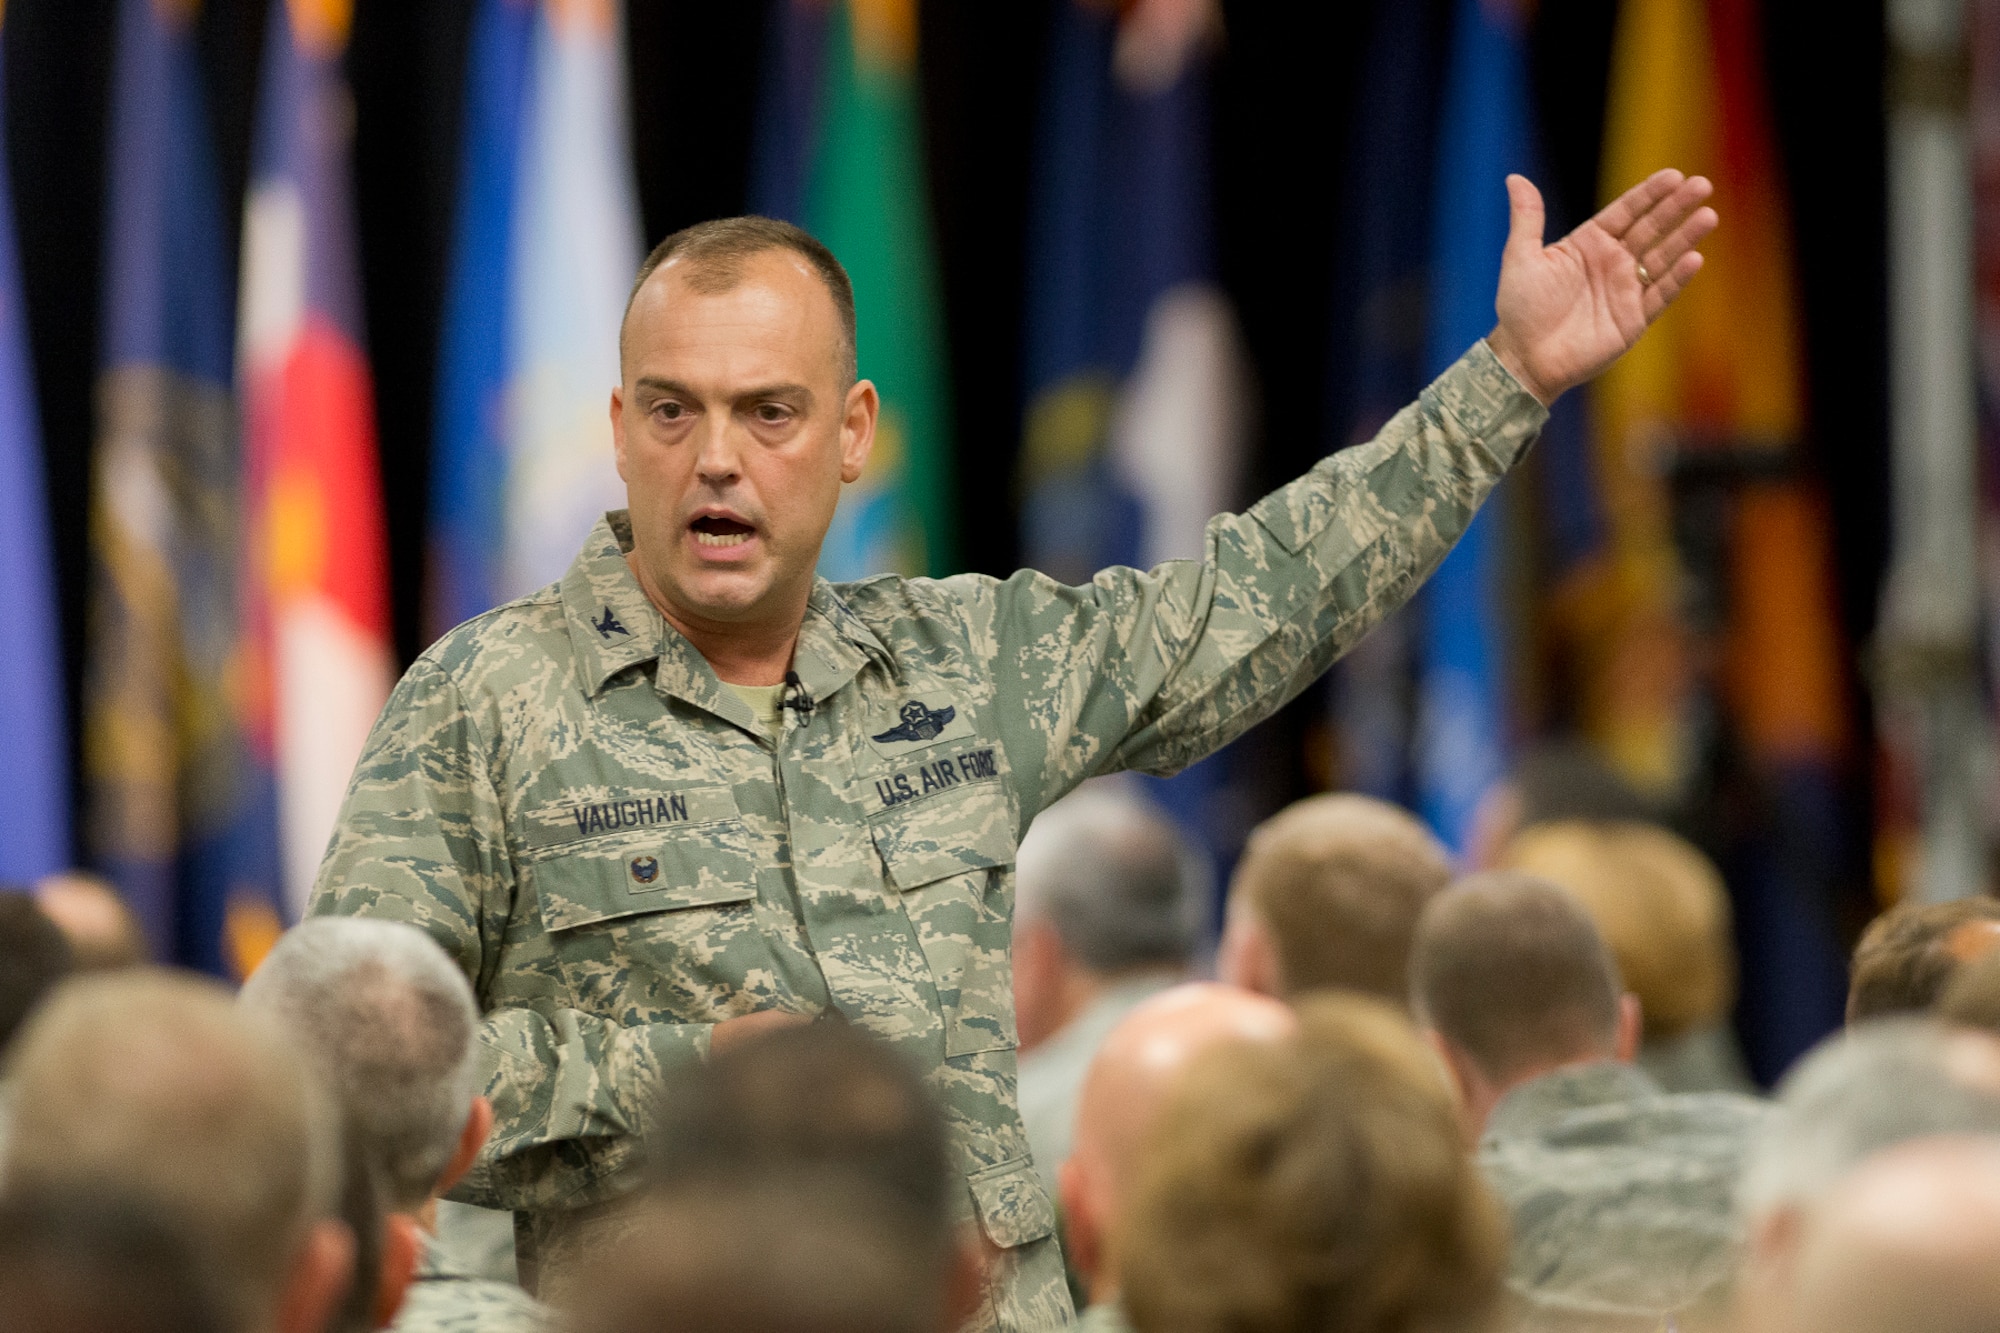 Col. Edward L. Vaughan, director of safety for the Air National Guard, delivers his overview address to the senior leaders during the 2014 Executive Safety Summit at Volk Field Combat Readiness Training Center, Wis., May 13, 2014. This year’s conference theme: “Leaders: Don’t Let Your Guard Down”, covers a wide range of topics including safety, resilience, diversity and mishap prevention. (U.S. Air National Guard Photo by Master Sgt. Marvin Preston/ Released)